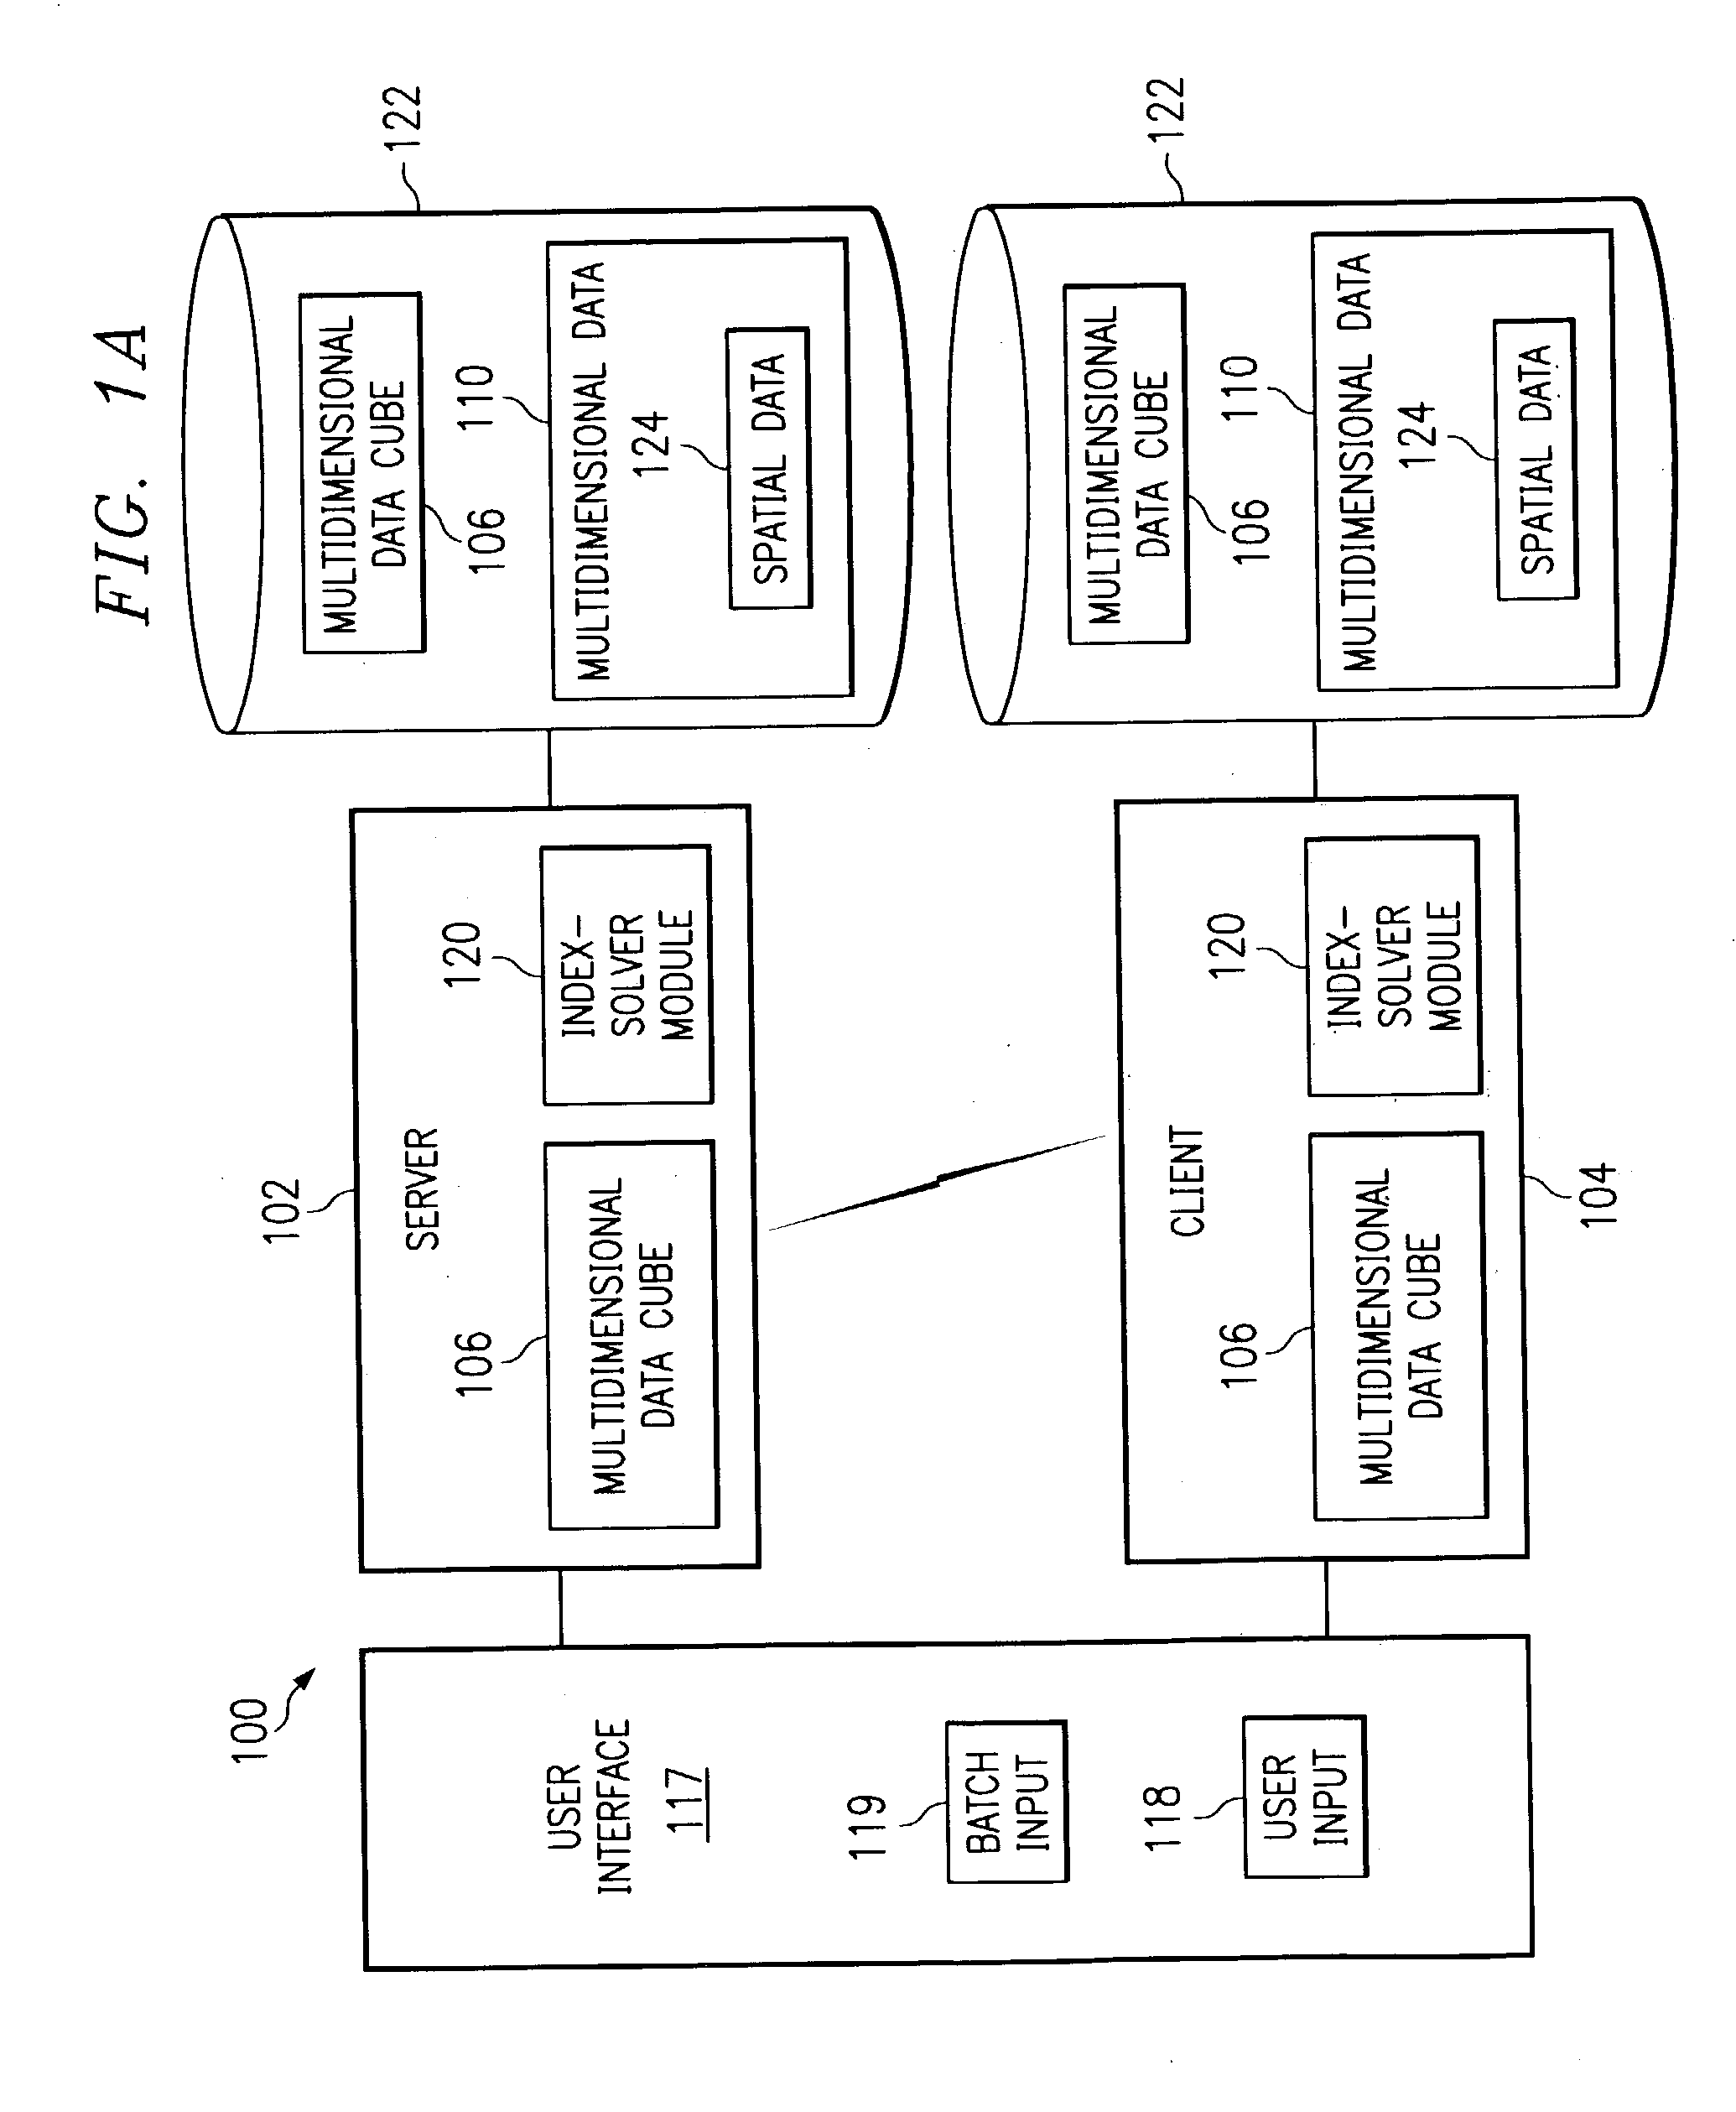 Systems, methods and computer program products to improve indexing of multidimensional databases